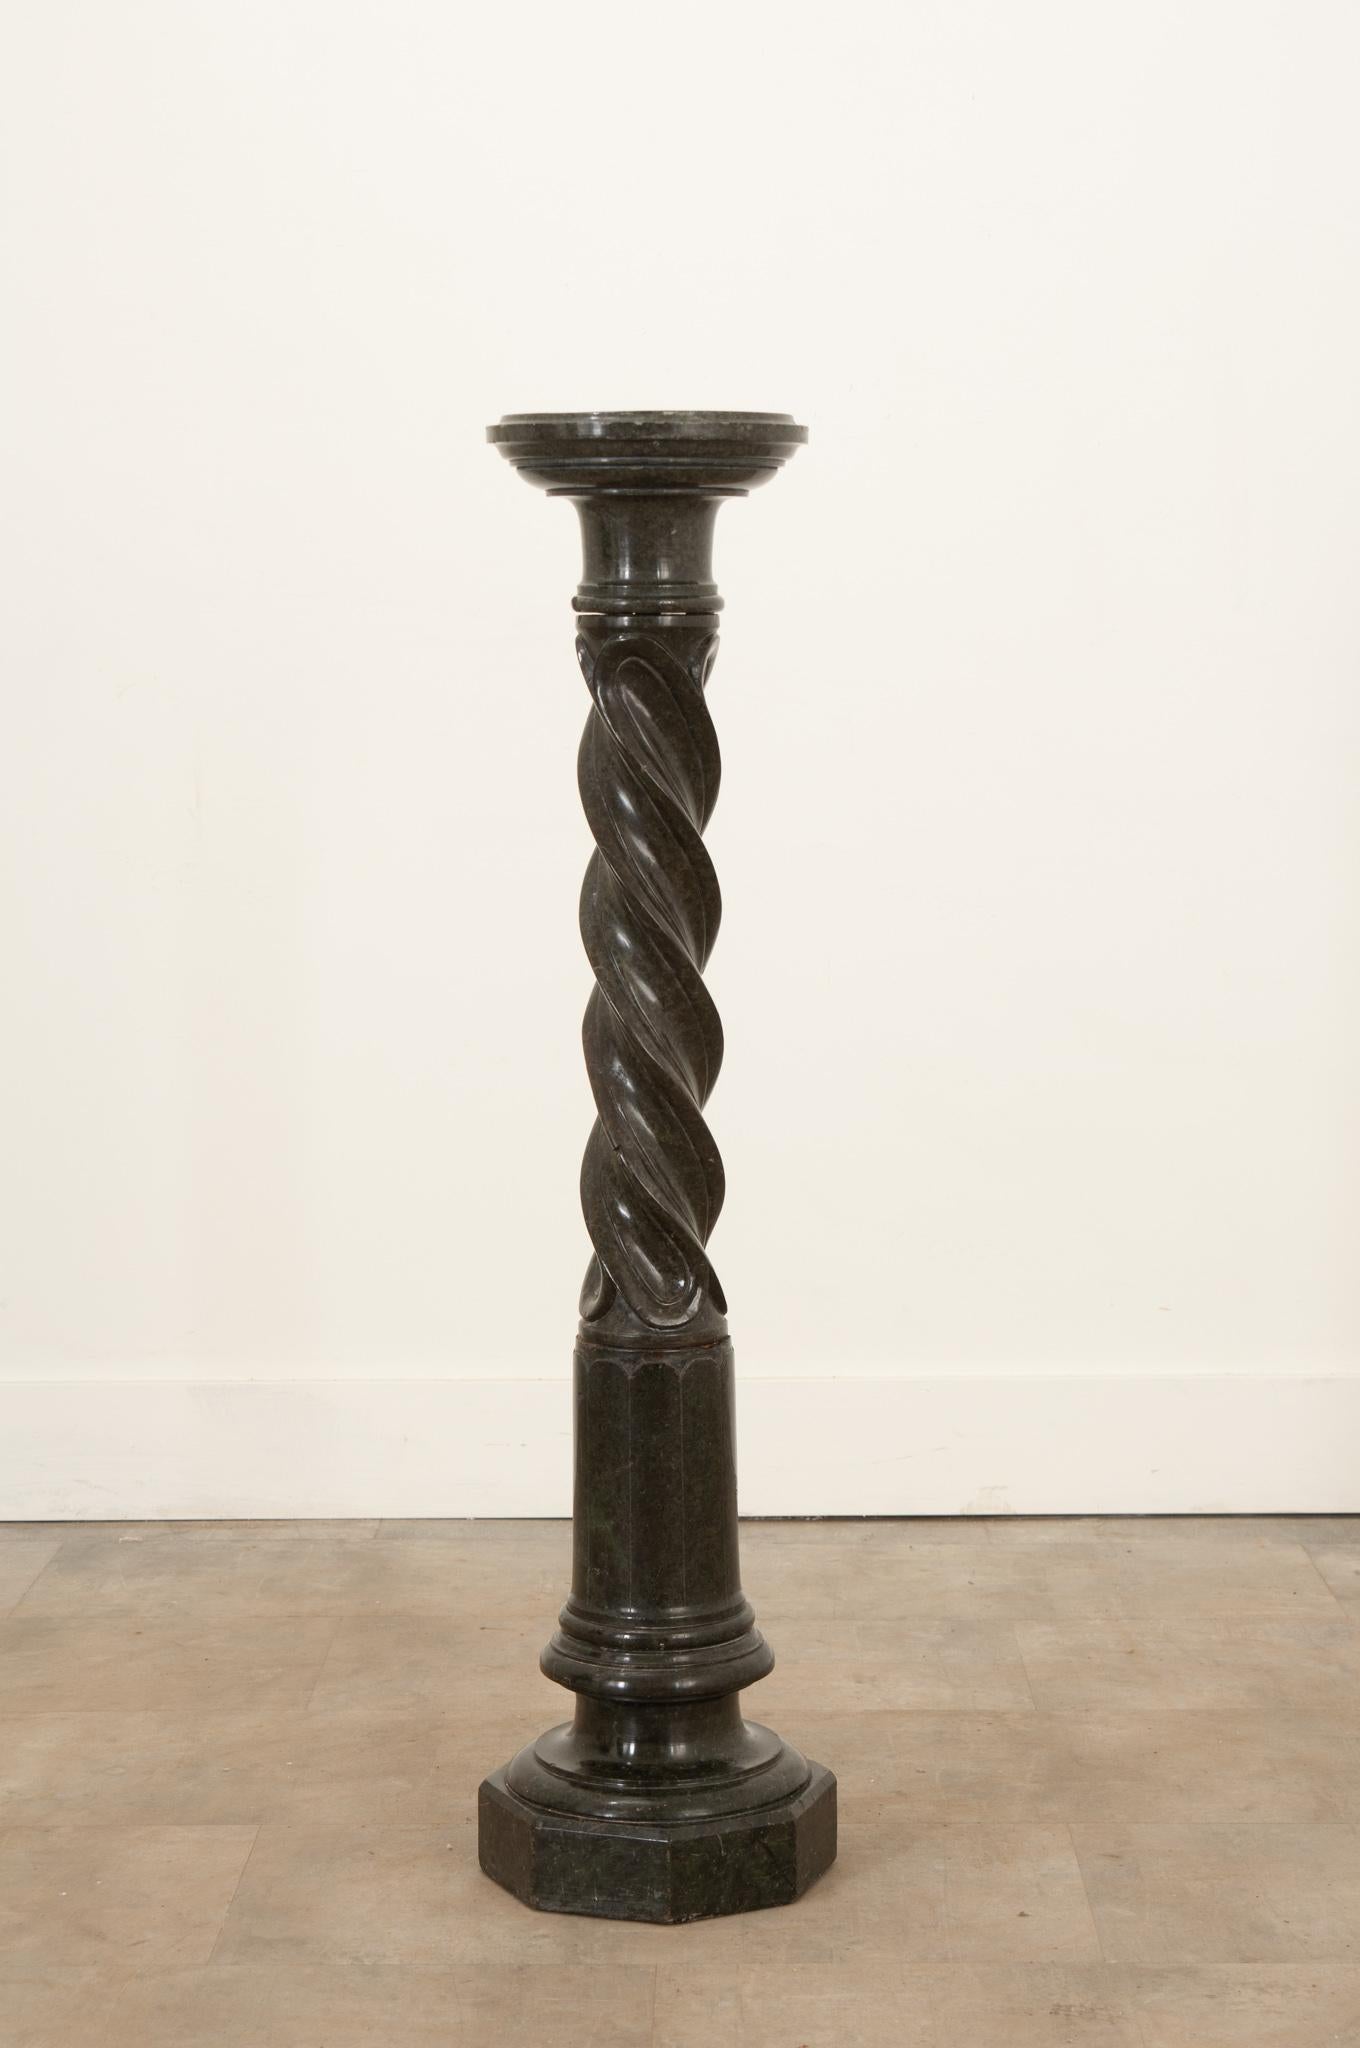 The hand carved black marble pedestal is the perfect accent in any space for an indoor plant or small statue. The top is removable via mortise and tenon joinery. The base has noticeable wear that adds to the overall charm. circa 1850. Make sure to